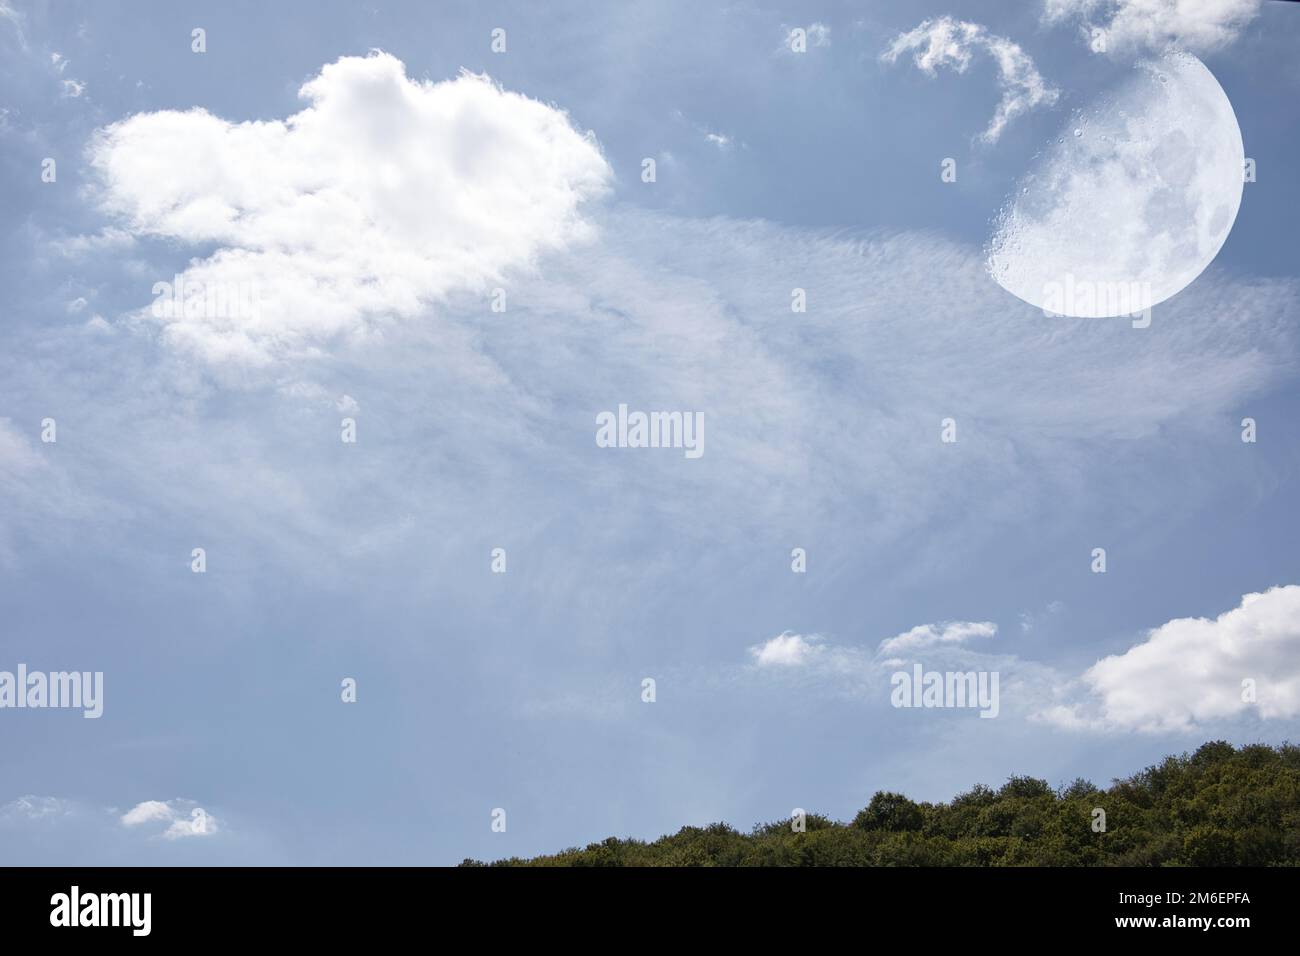 Cloud formations with moon in the blue summer sky Stock Photo